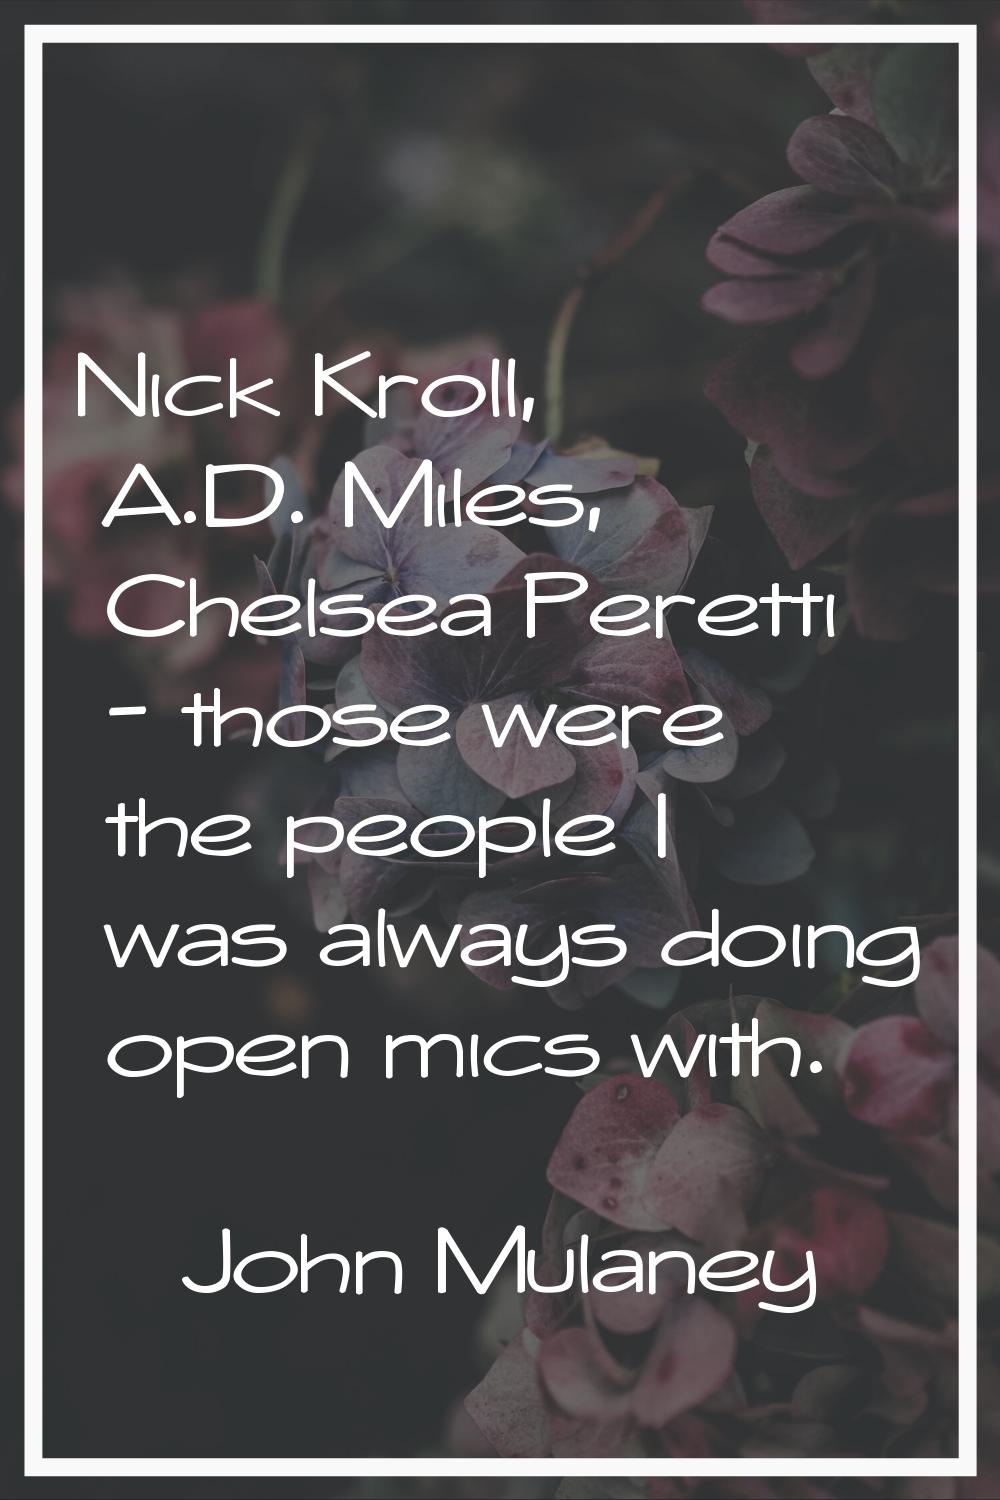 Nick Kroll, A.D. Miles, Chelsea Peretti - those were the people I was always doing open mics with.